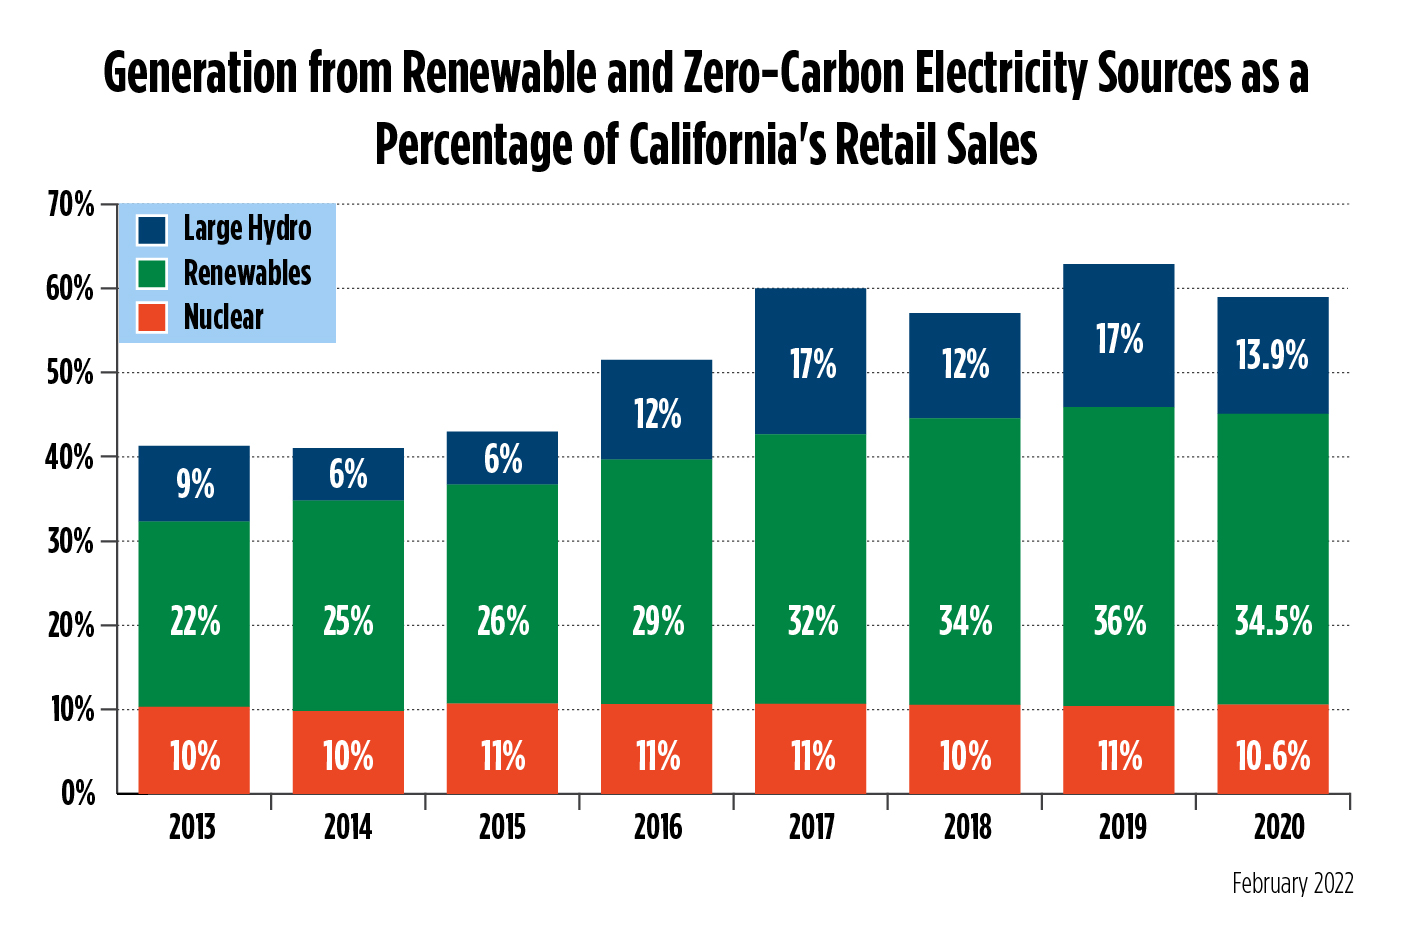 Graph showing generation from renewable and zero-carbon electricity sources as a percentage of California's retail sales.